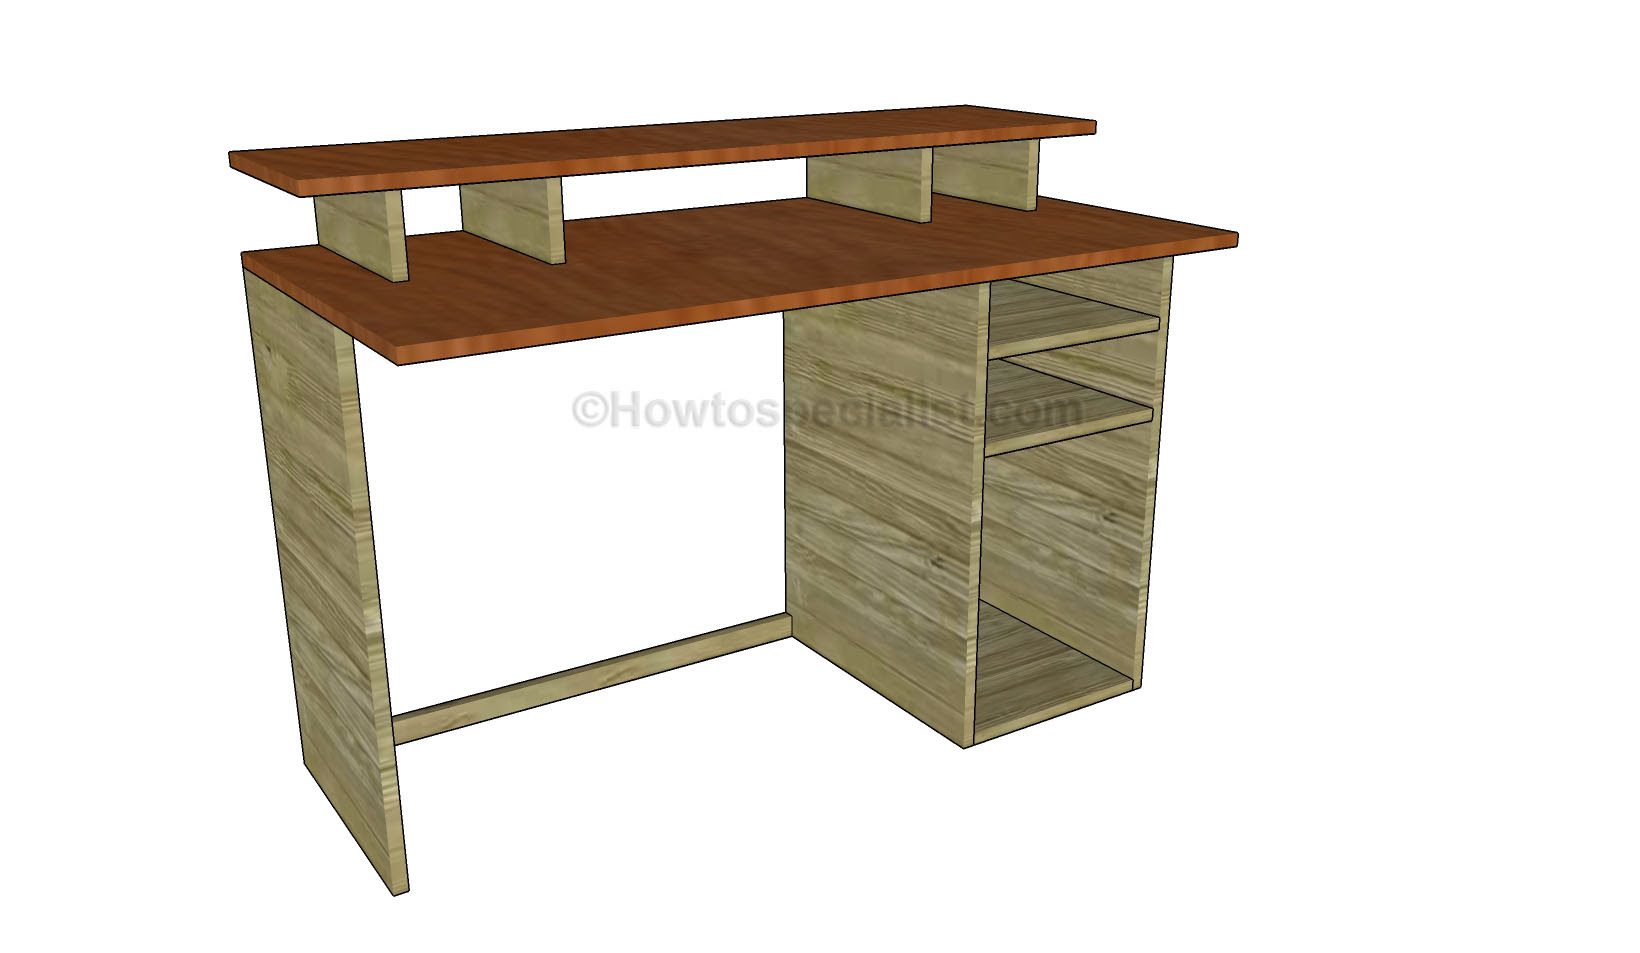 Office desk plans | HowToSpecialist - How to Build, Step ...